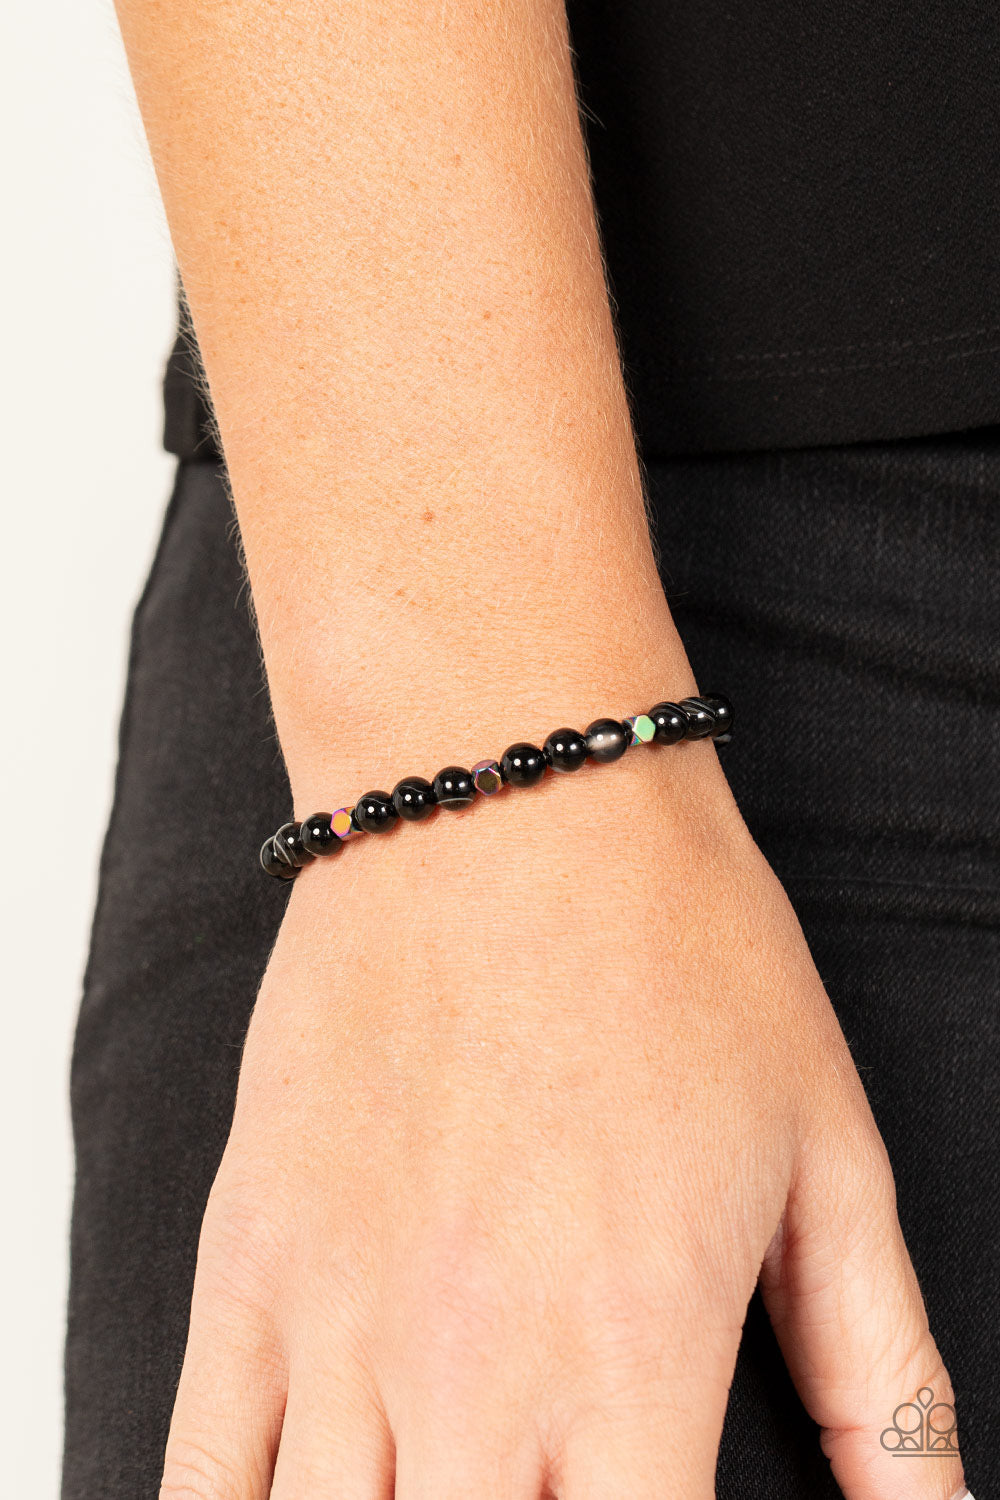 Paparazzi Interstellar Solitude - Black Stone and Oil Spill Beads Bracelet. Get Free Shipping